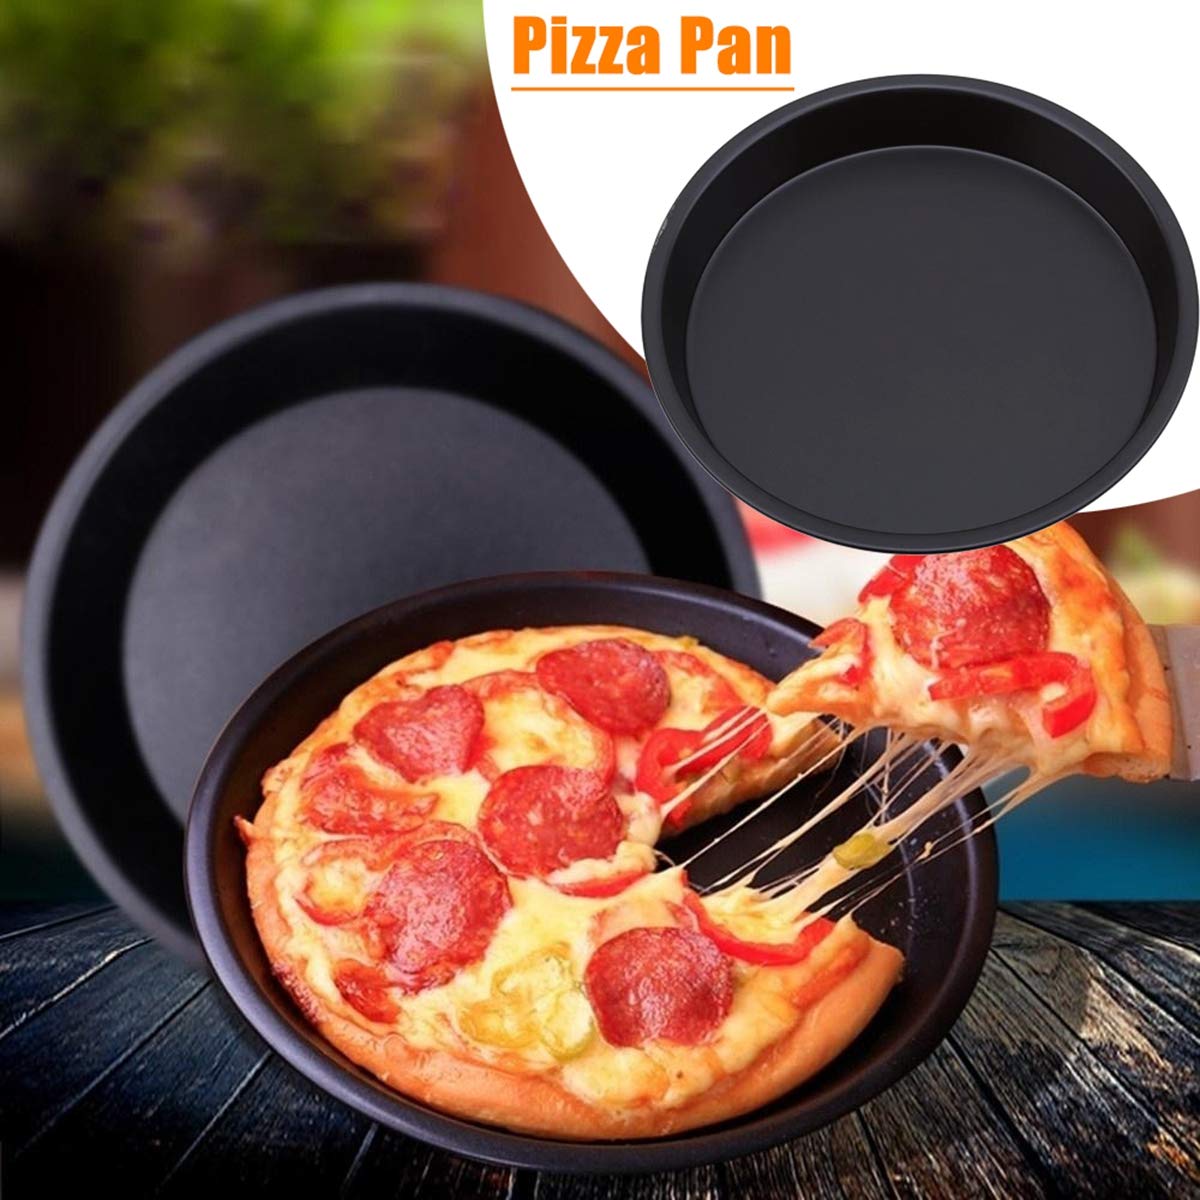 Stainless Steel Round Pizza Pan,Carbon Steel Non-Stick Oven Pizza Plate Pan Bakeware Tray Mold Deep Dish Pizza Pan(8inch)